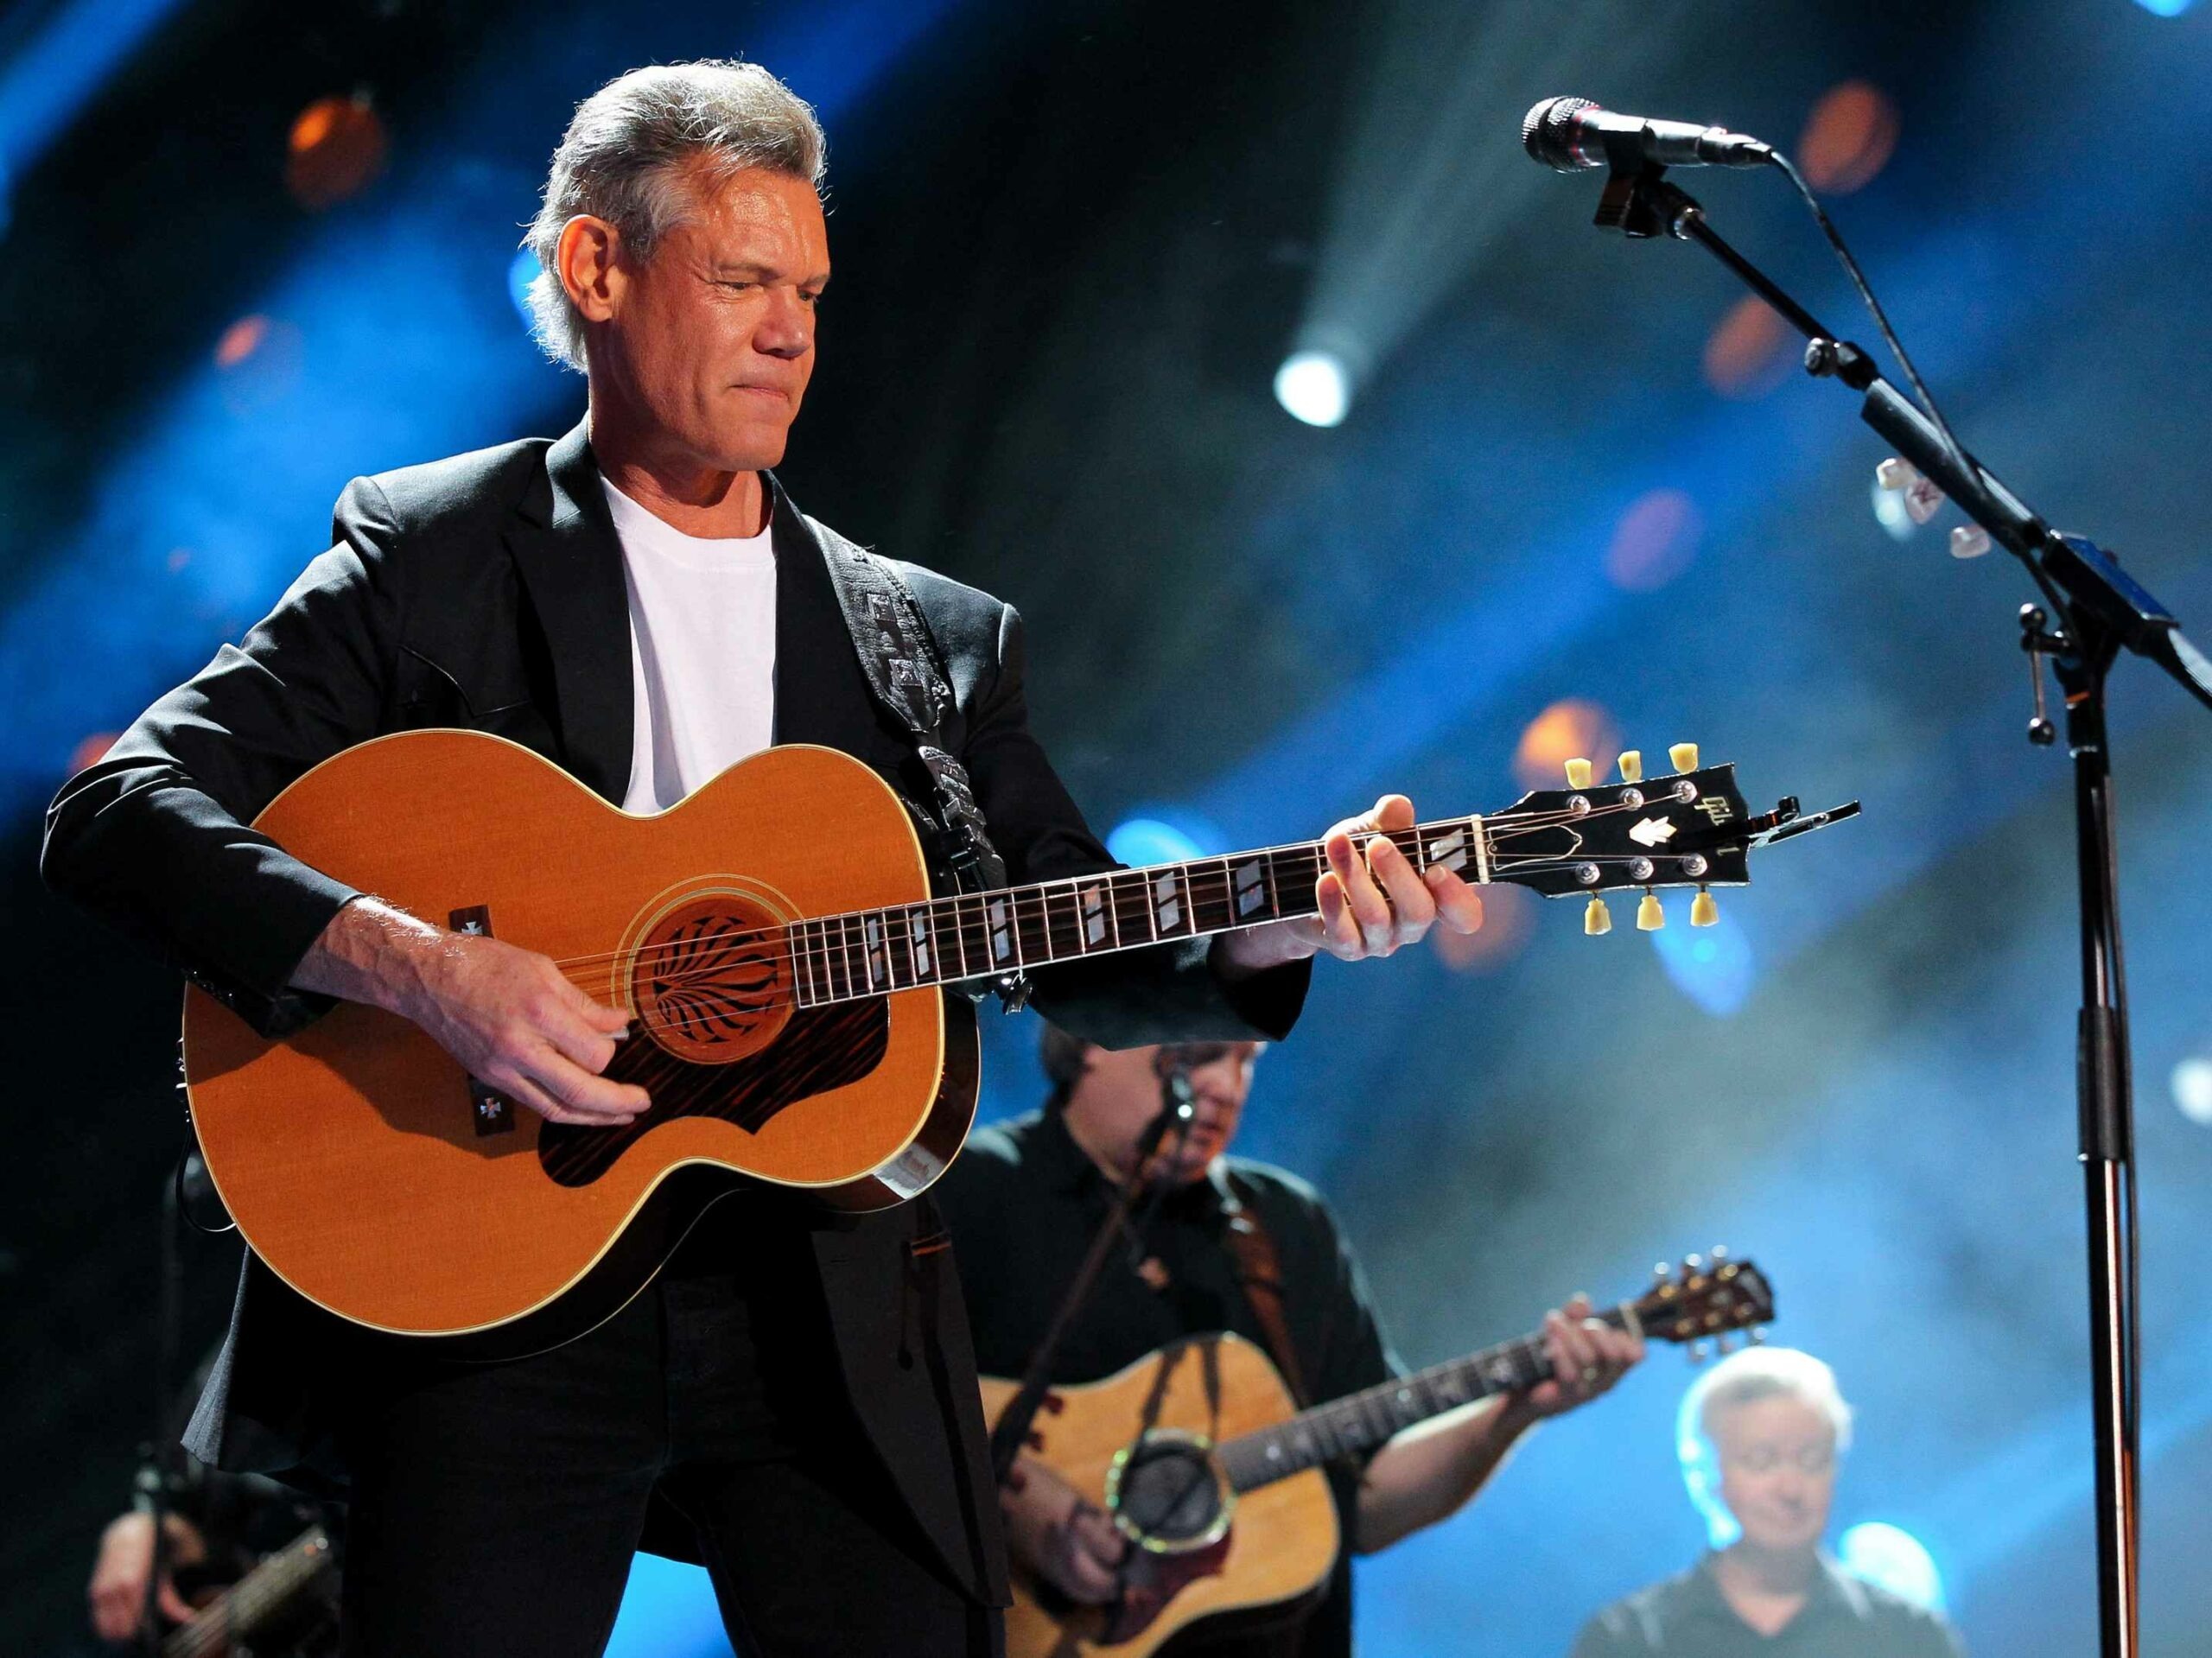 What country music is all about is Randy Travis, who is recognized for a great career despite health issues.